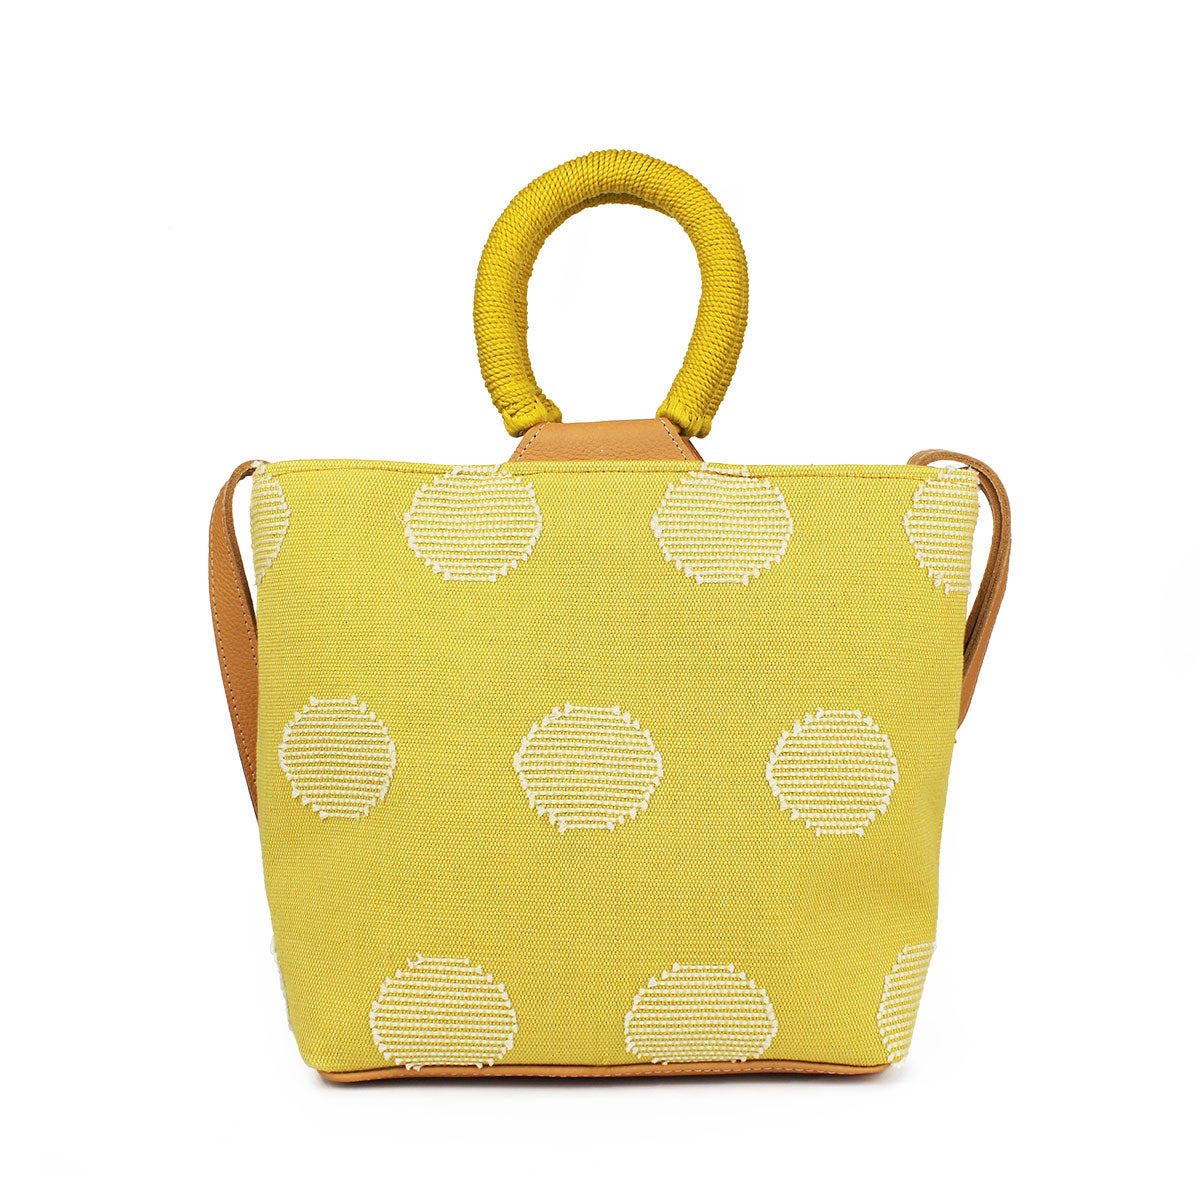 Back of the hand woven artisan Dalila Midi Tote in Sunrise Yellow. The back has the same white circular pattern as the front. It has rounded handles coiled in yellow thread.